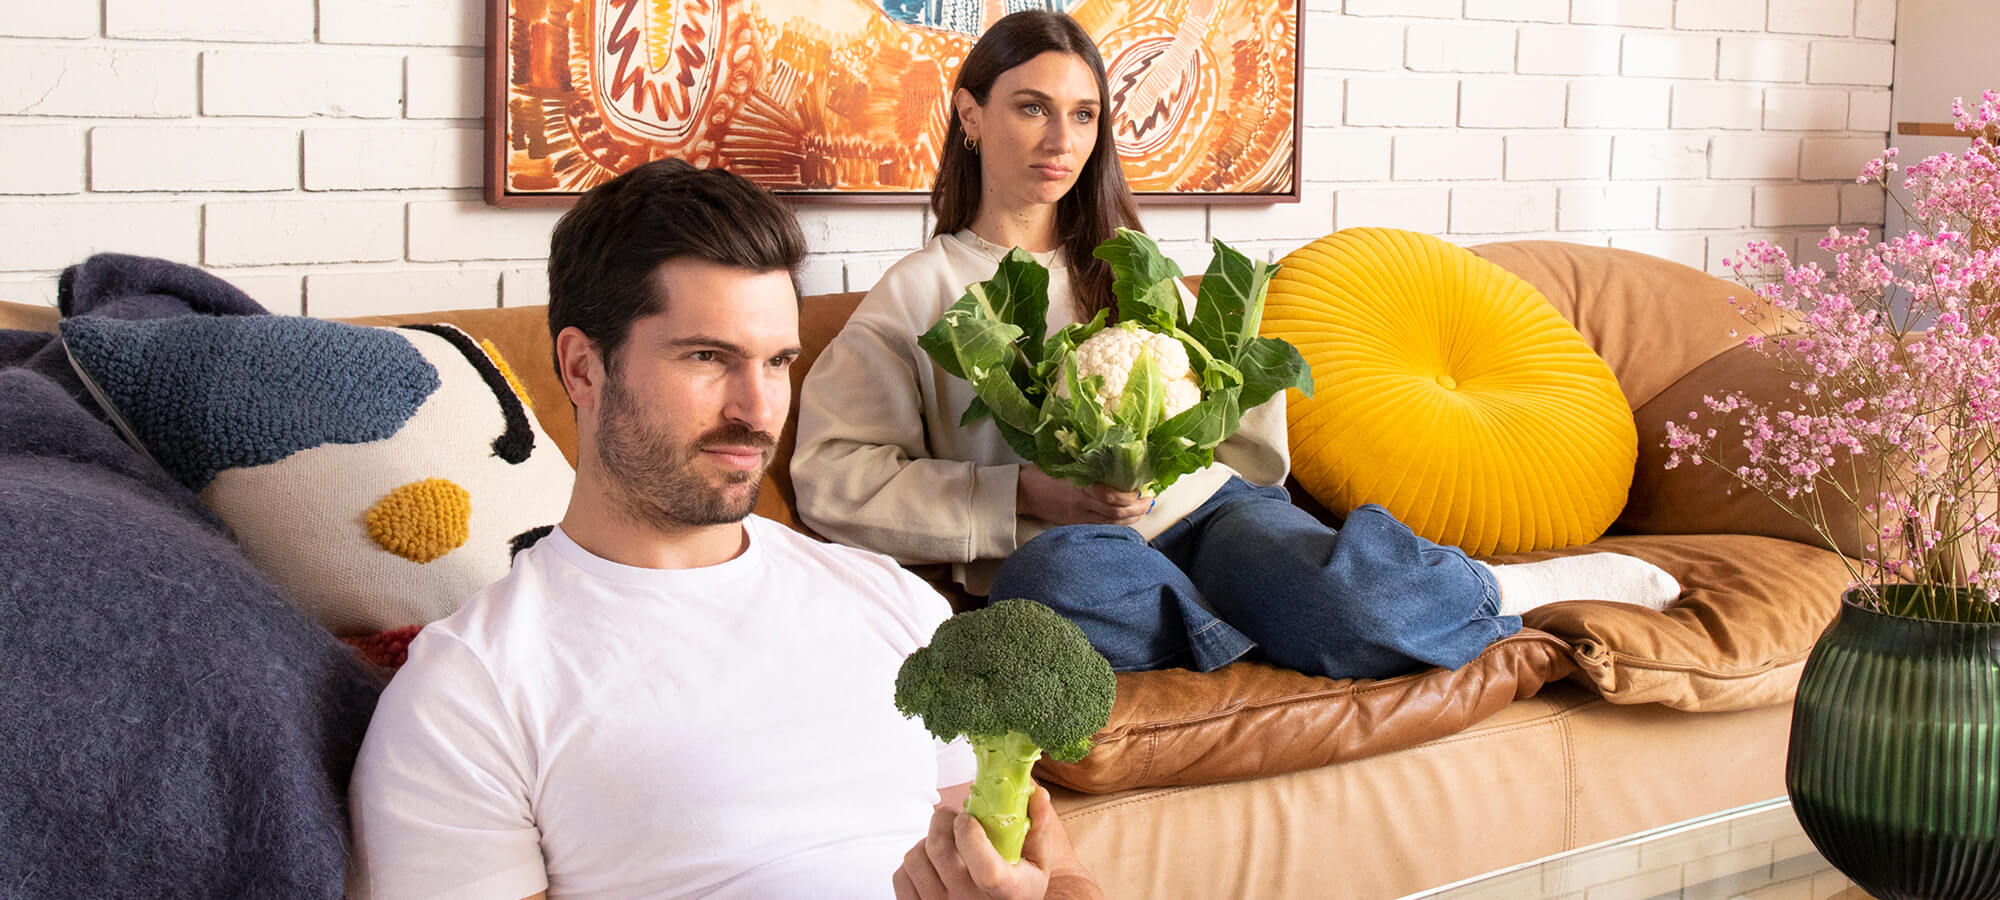 NutriV couple with vegetables